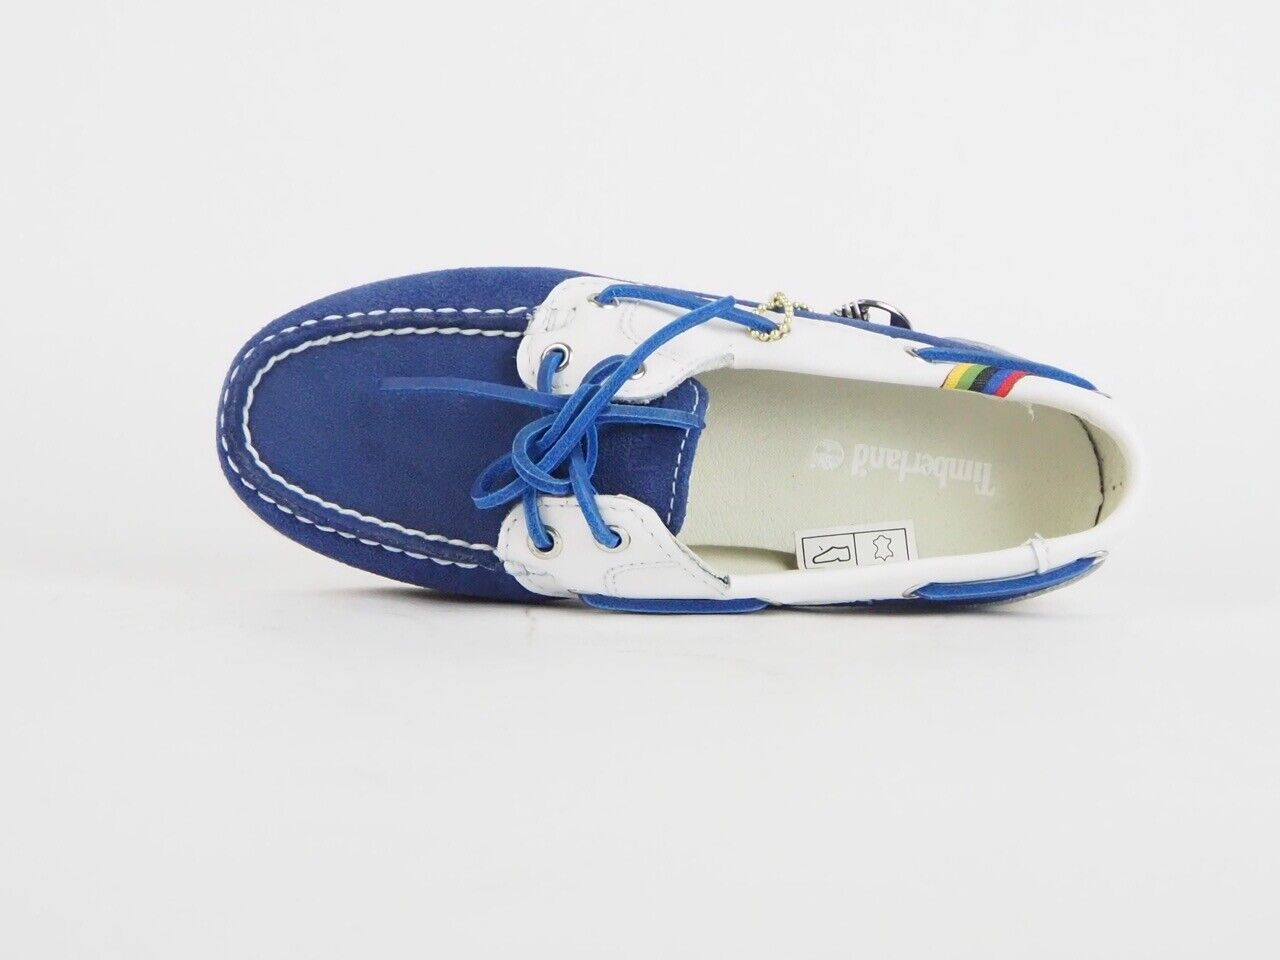 Womens Timberland Amherst 2 Eye Boat 42674 Blue White Leather Boat Shoes - London Top Style